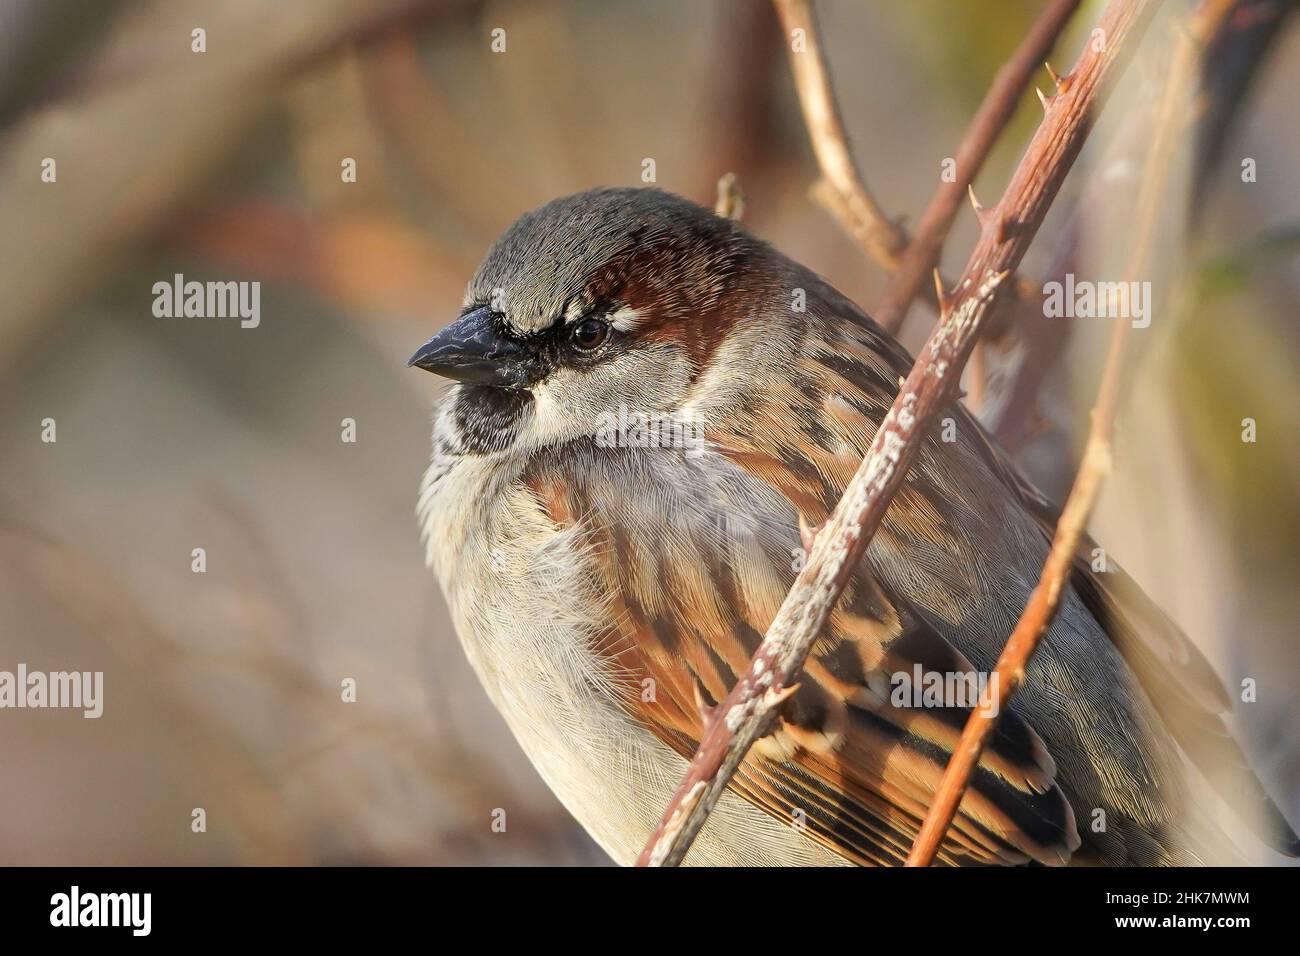 Close side view of a wild, male house sparrow bird (Passer domesticus) isolated outdoors, perching in UK garden. Stock Photo